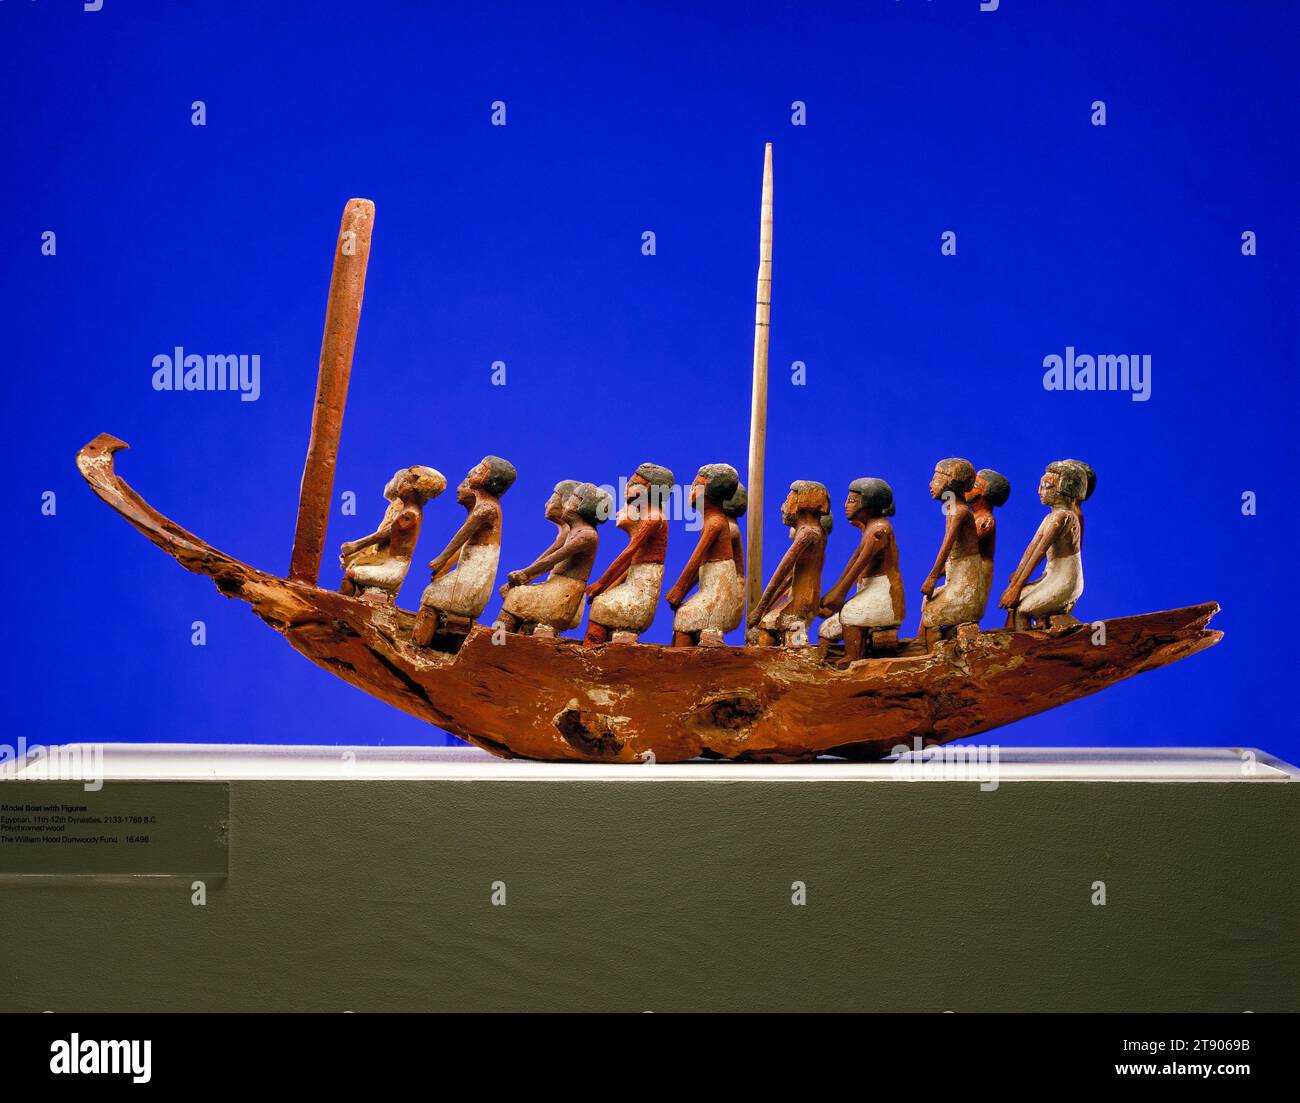 Model Boat and Figures, 22nd-18th century BCE, 27 x 37 1/2 x 6 in. (68.58 x 95.25 x 15.24 cm), Polychromed wood, Egypt, 22nd-18th century BCE, This boat, manned by eighteen oarsmen and equipped with a mast and a mount for the steering oar, is of the type commonly placed in the tomb of a deceased noble or government official. It faithfully represents the vessels used in daily life for fishing and for transportation on the Nile. A model boat enabled the deceased to make a pilgrimage by magical proxy to the city of Abydos, the cult center of the god Osiris. Sometimes two boats were provided Stock Photo